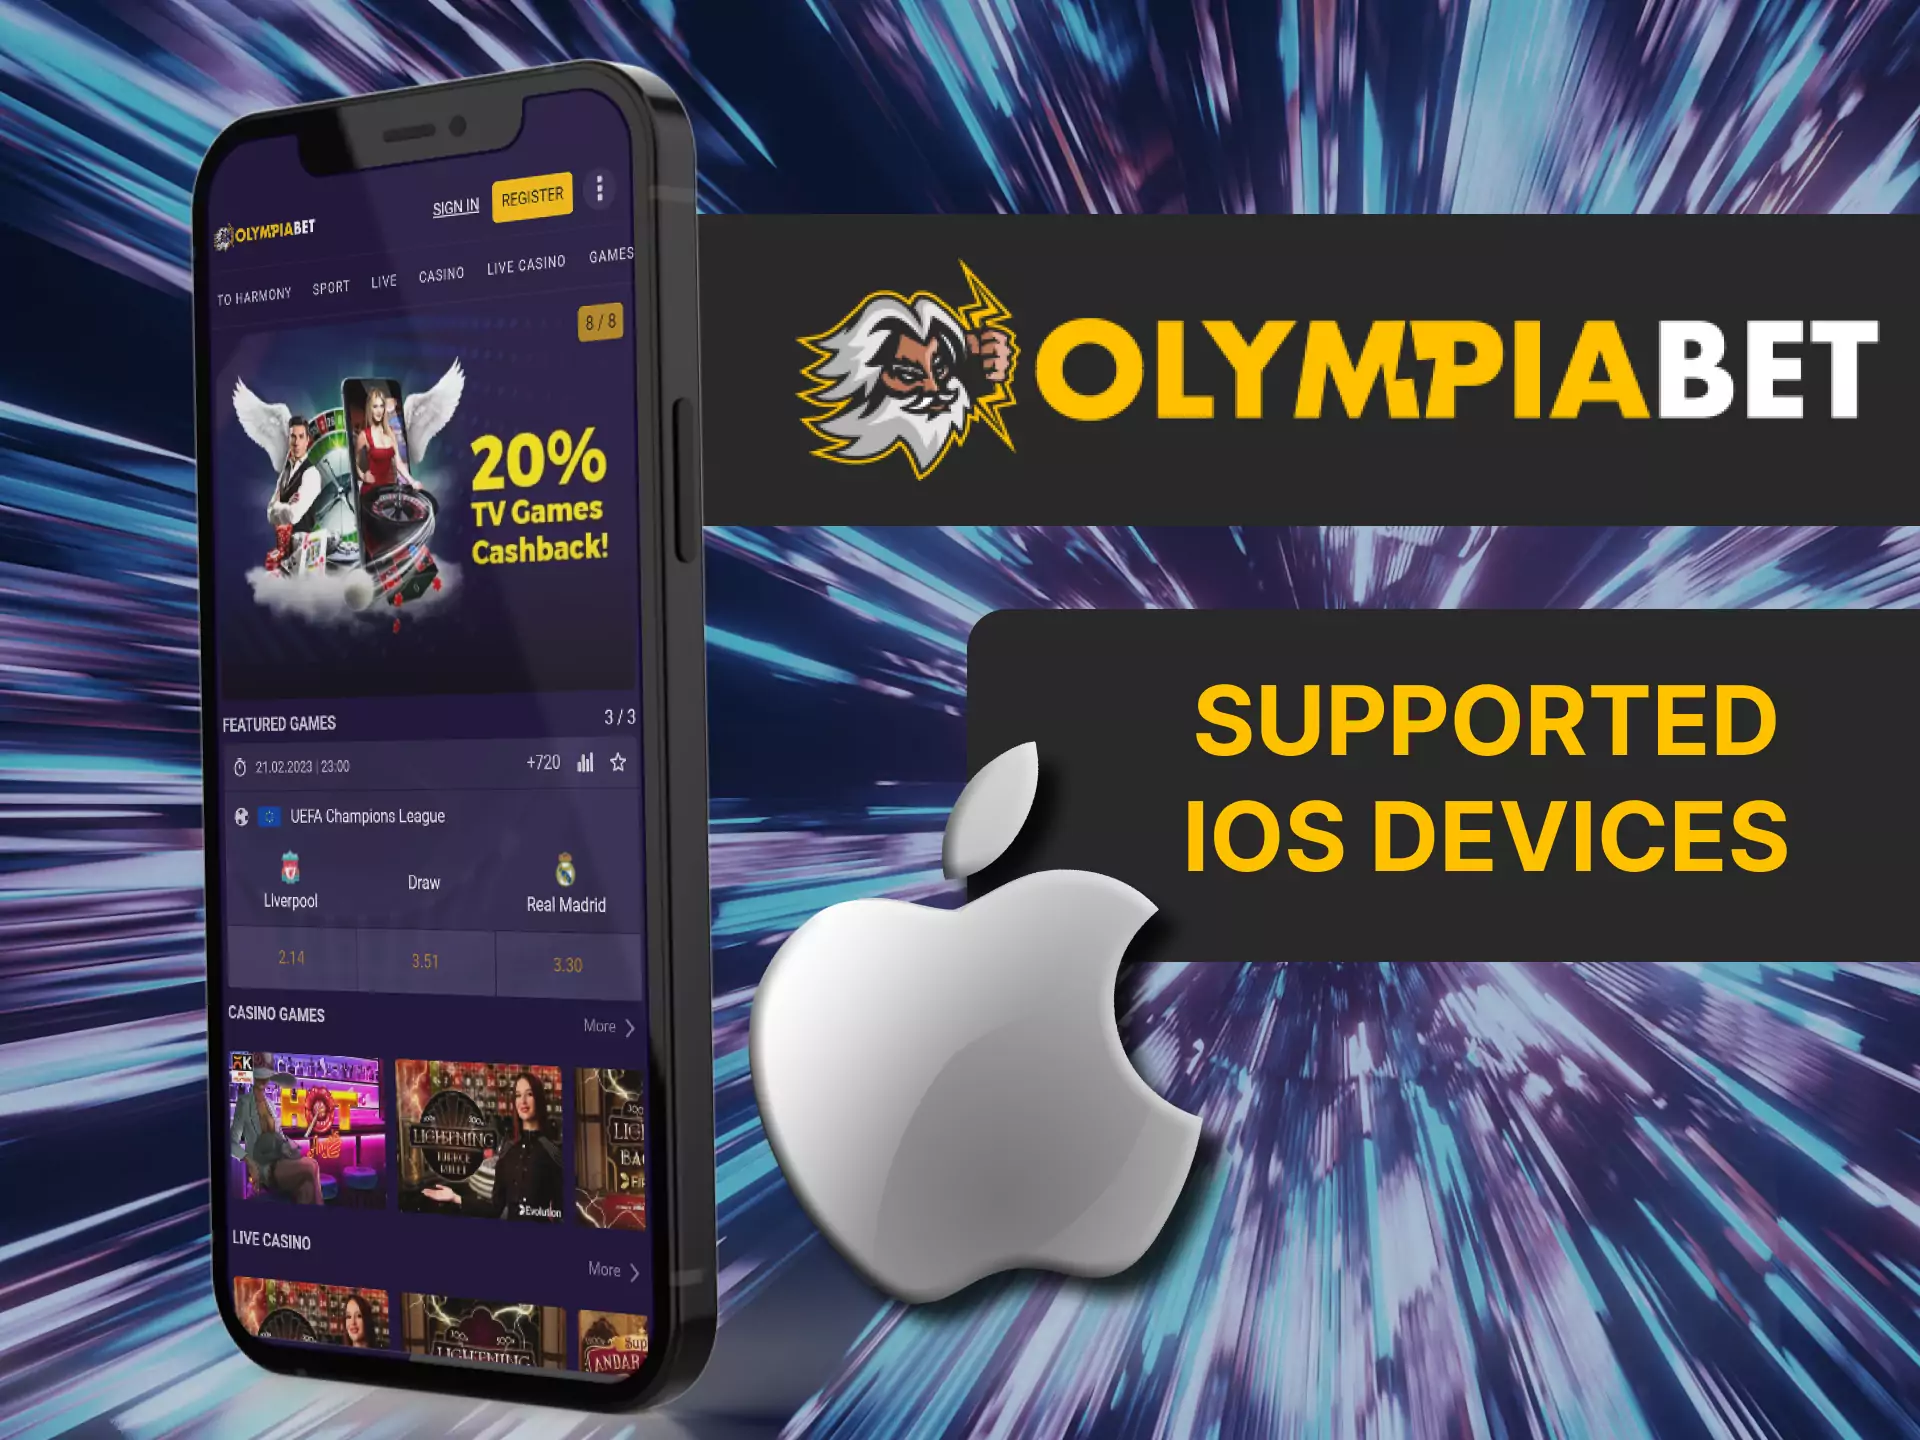 Olympiabet is supported on various models of iOS devices.